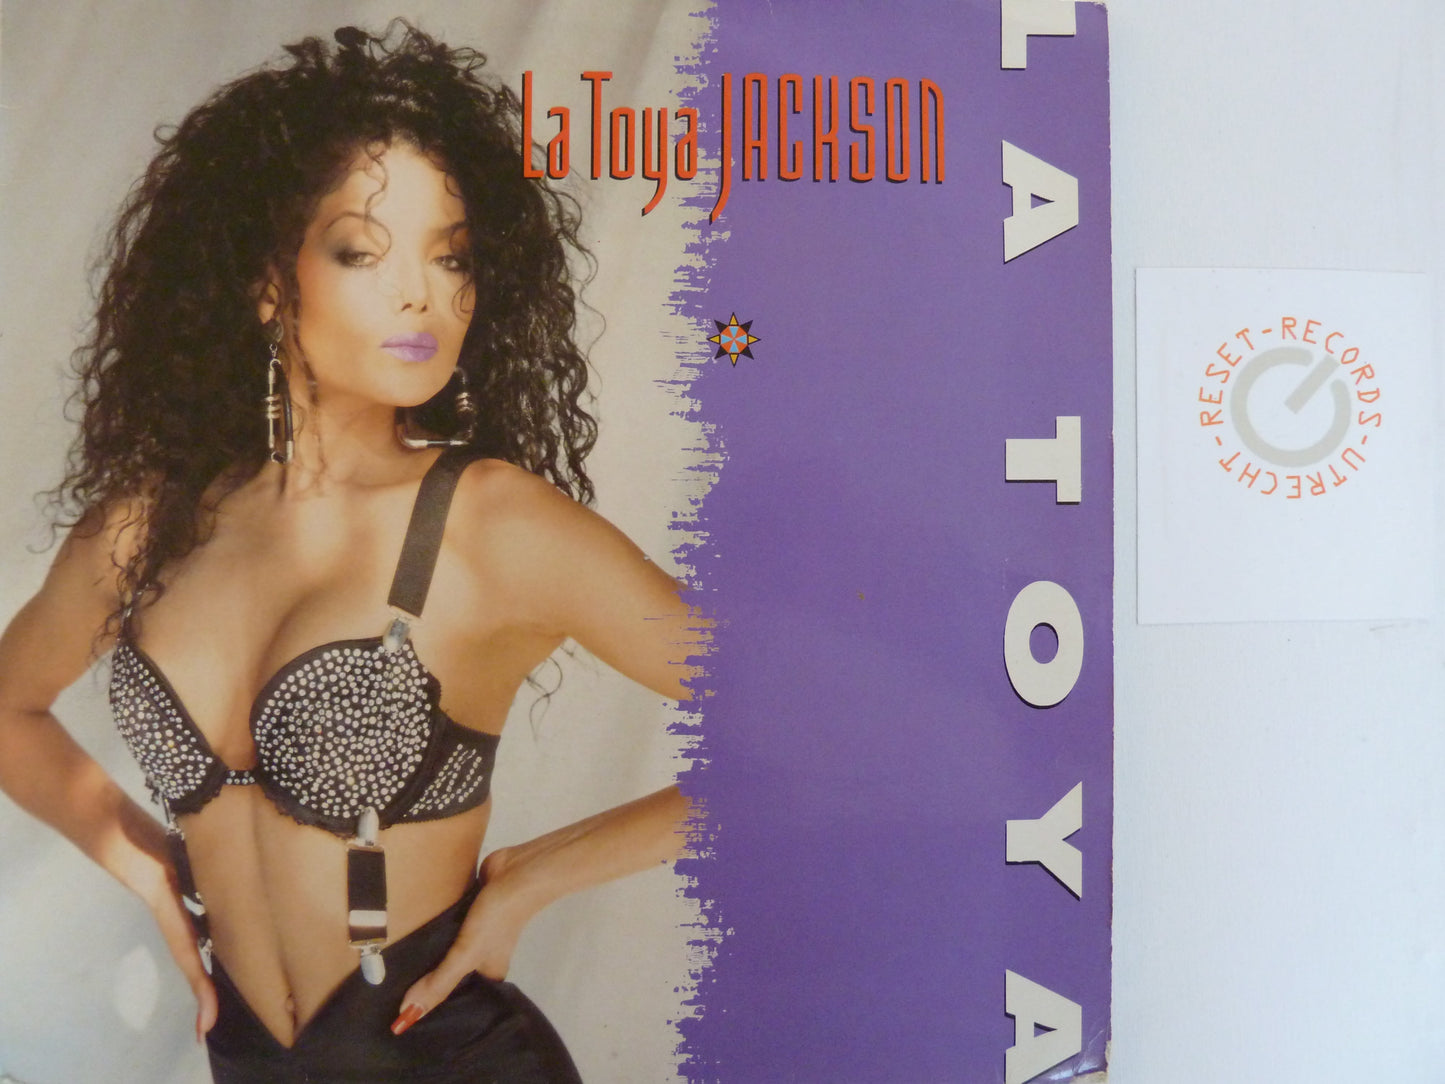 In the shadow of your famous family #2 inspired by La Toya Jackson – La Toya